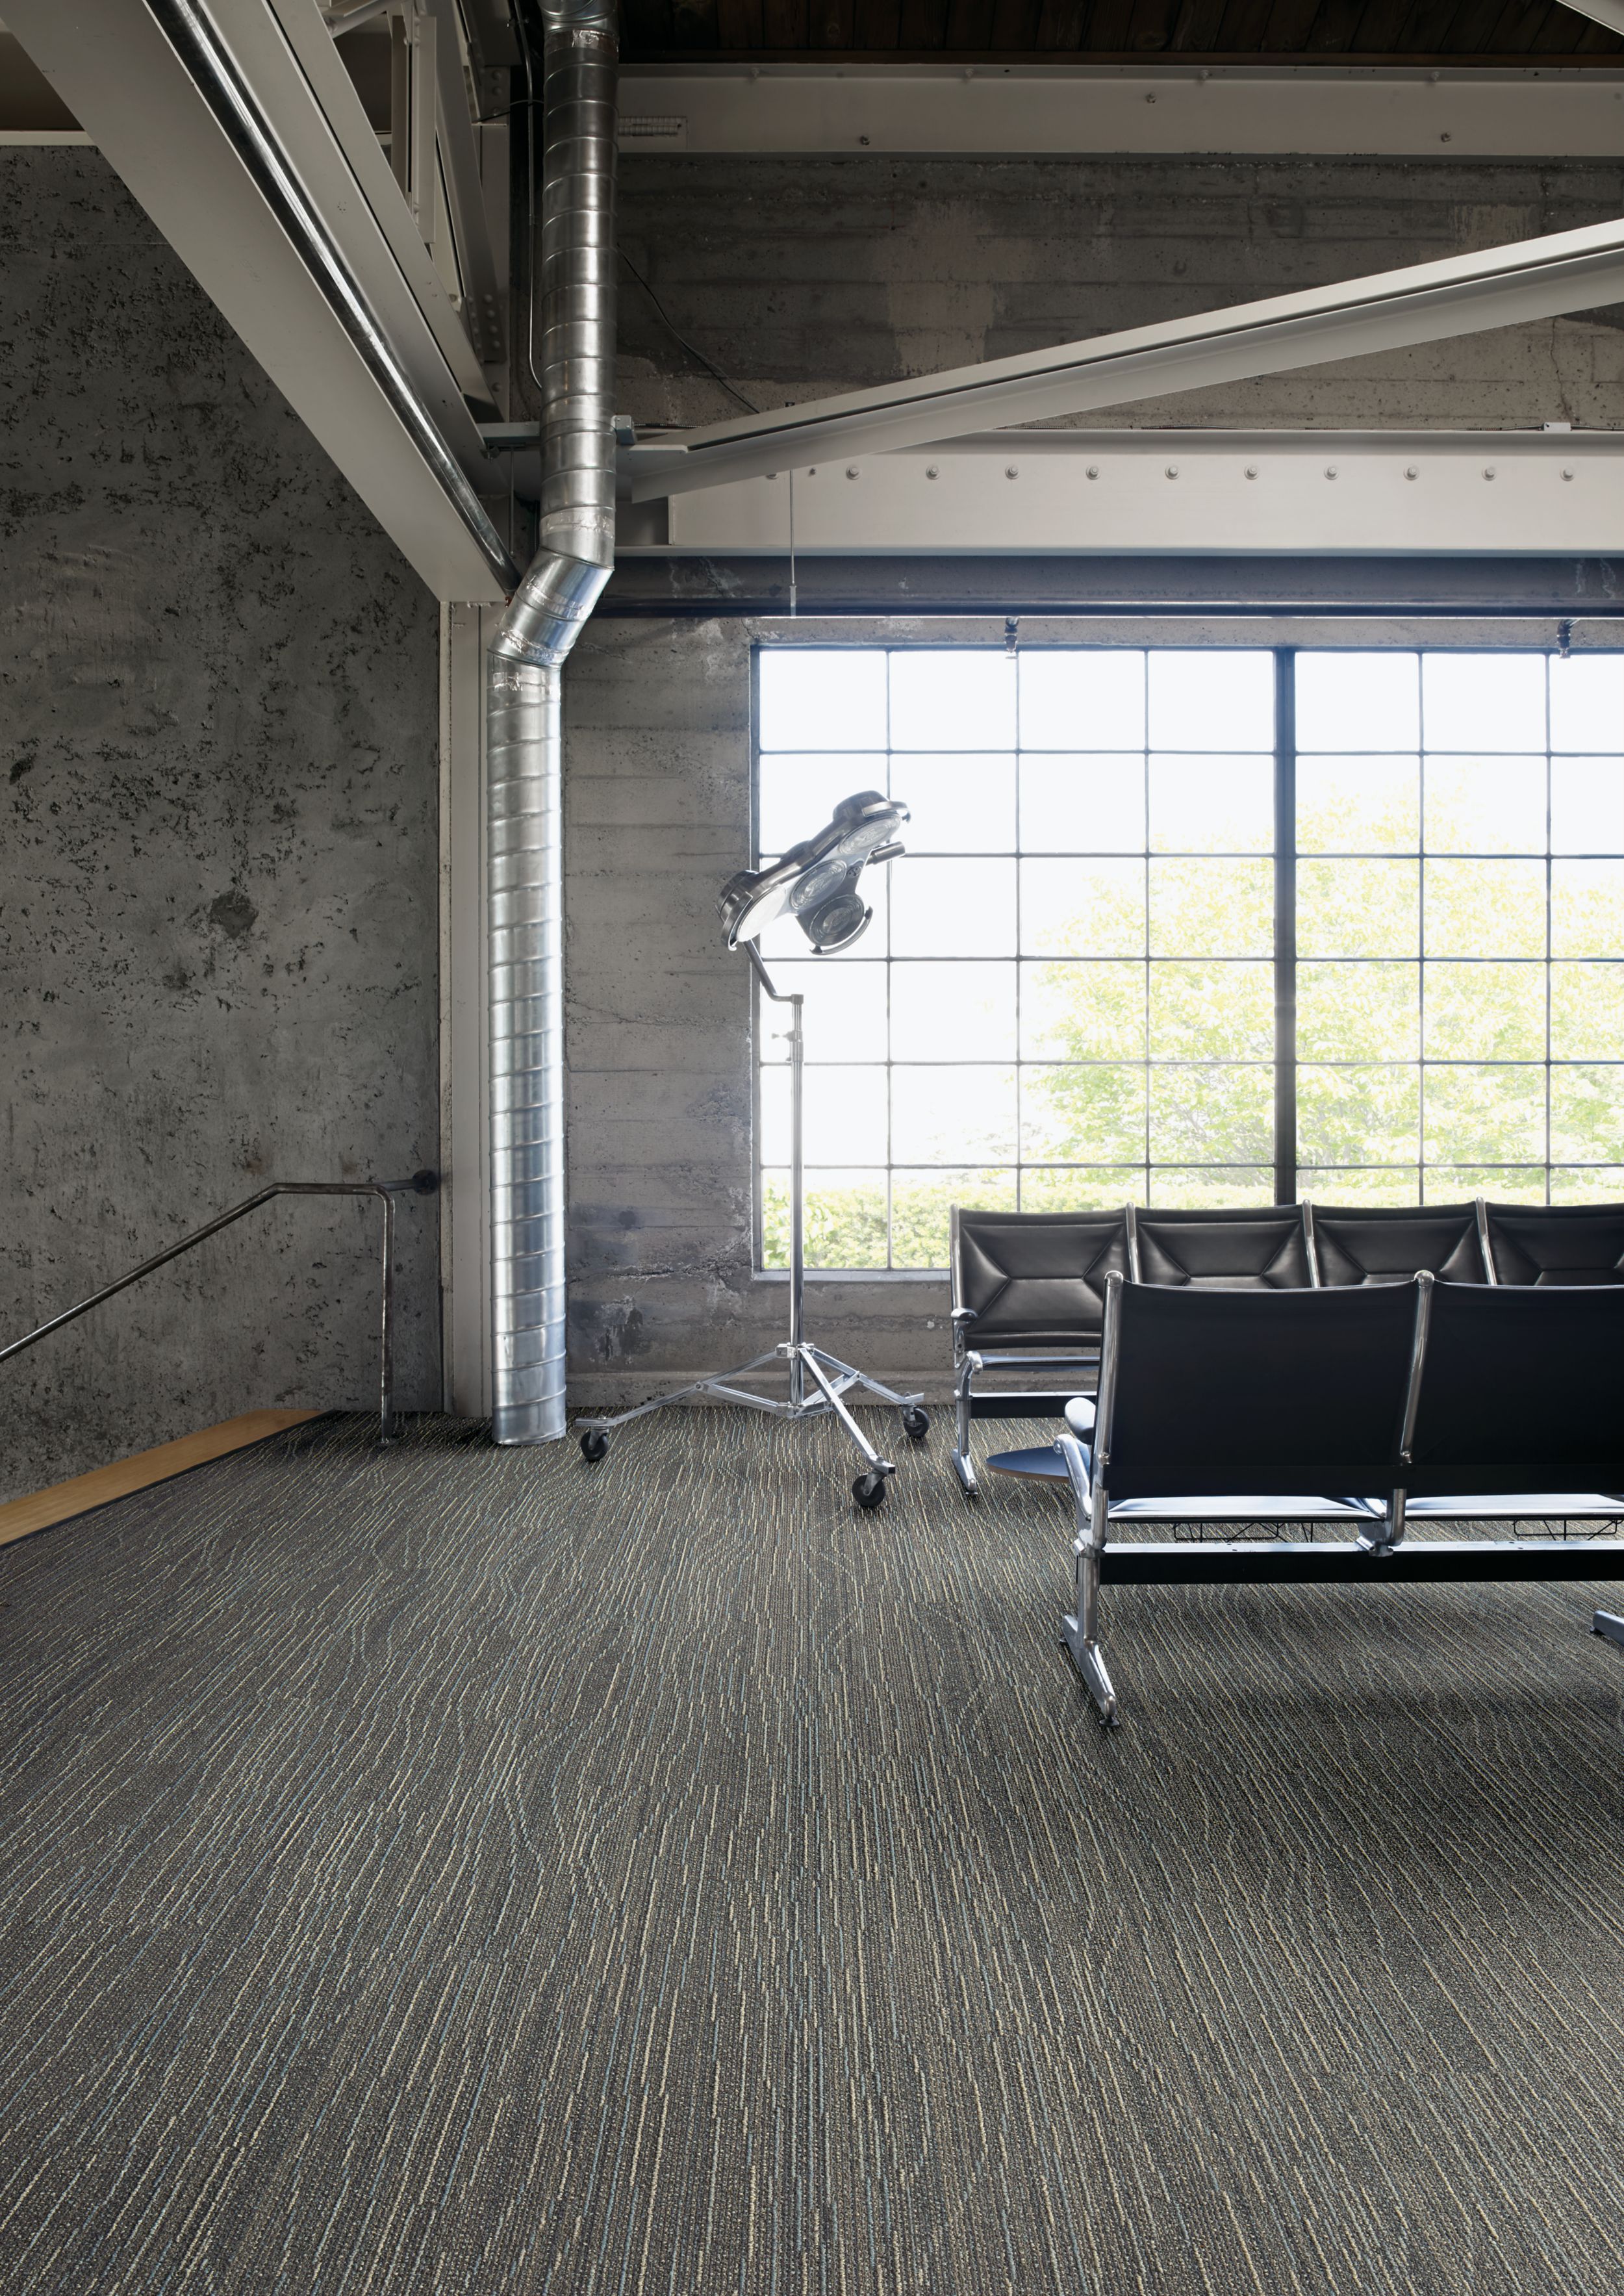 Interface Snow Moon plank carpet tile in waiting area with concrete walls and exposed beams numéro d’image 6